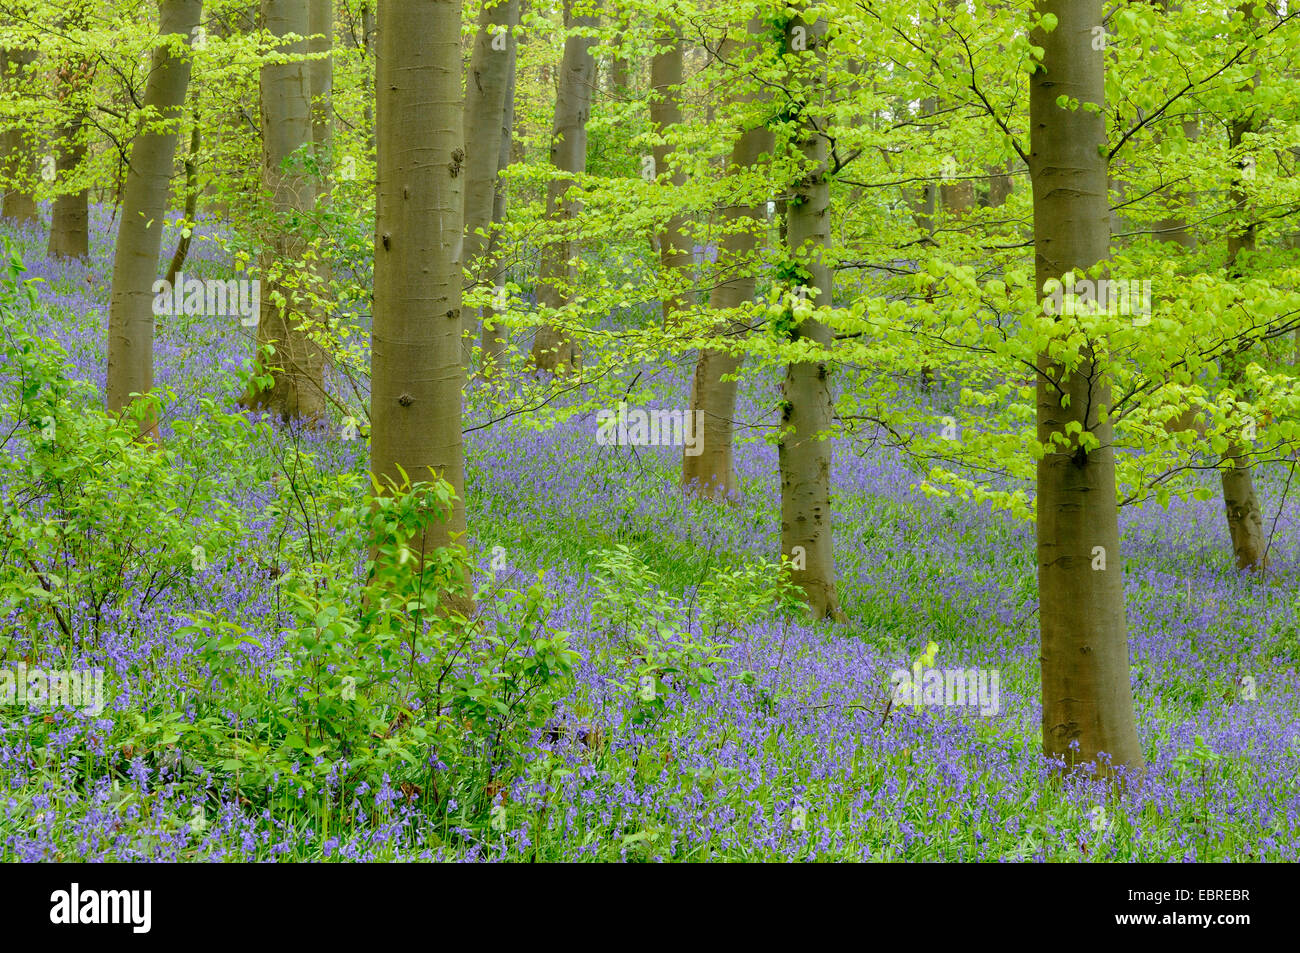 Atlantic bluebell (Hyacinthoides non-scripta, Endymion non-scriptus, Scilla non-scripta), blooming on the forest ground in spring, Germany Stock Photo